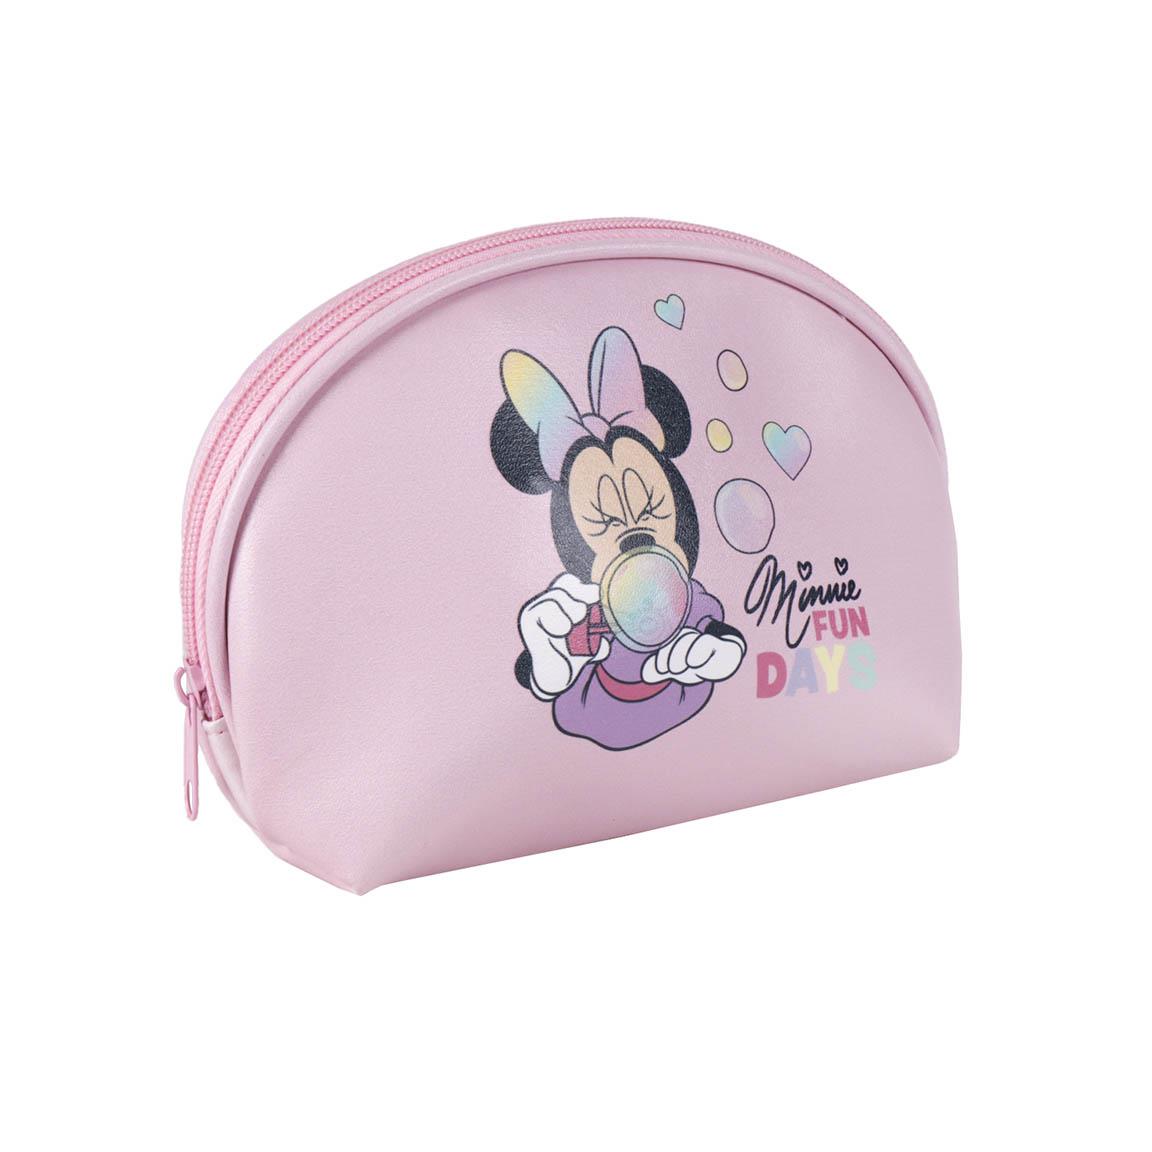 Neceser Minnie Mouse 76255 - rosa - 